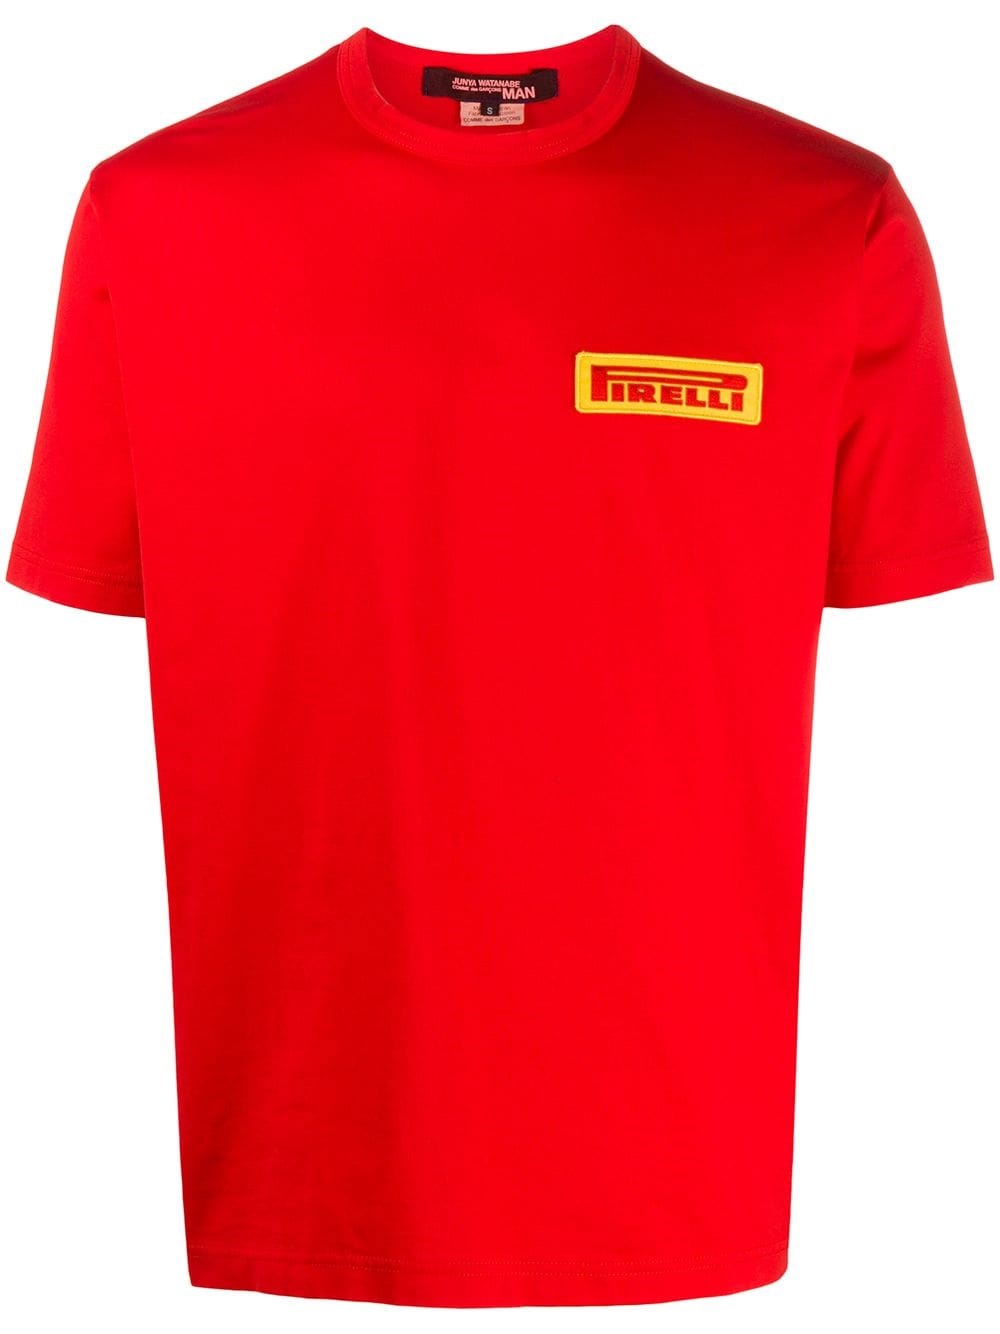 junya watanabe comme dg PIRELLI T-SHIRT available on montiboutique.com ...